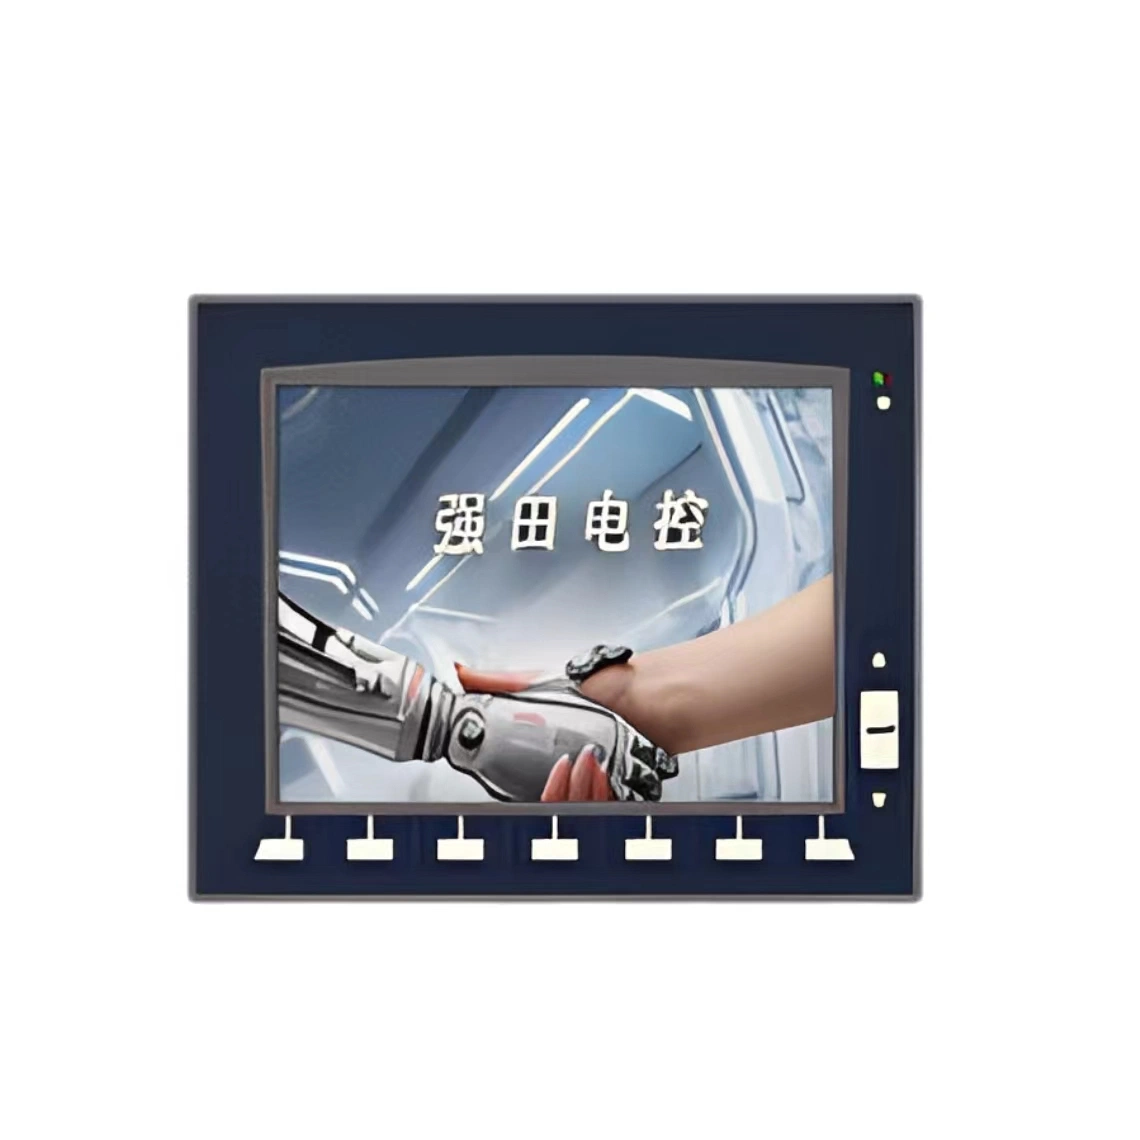 Electric Control Display Alarm Information Display Applied for Industrial Machinery